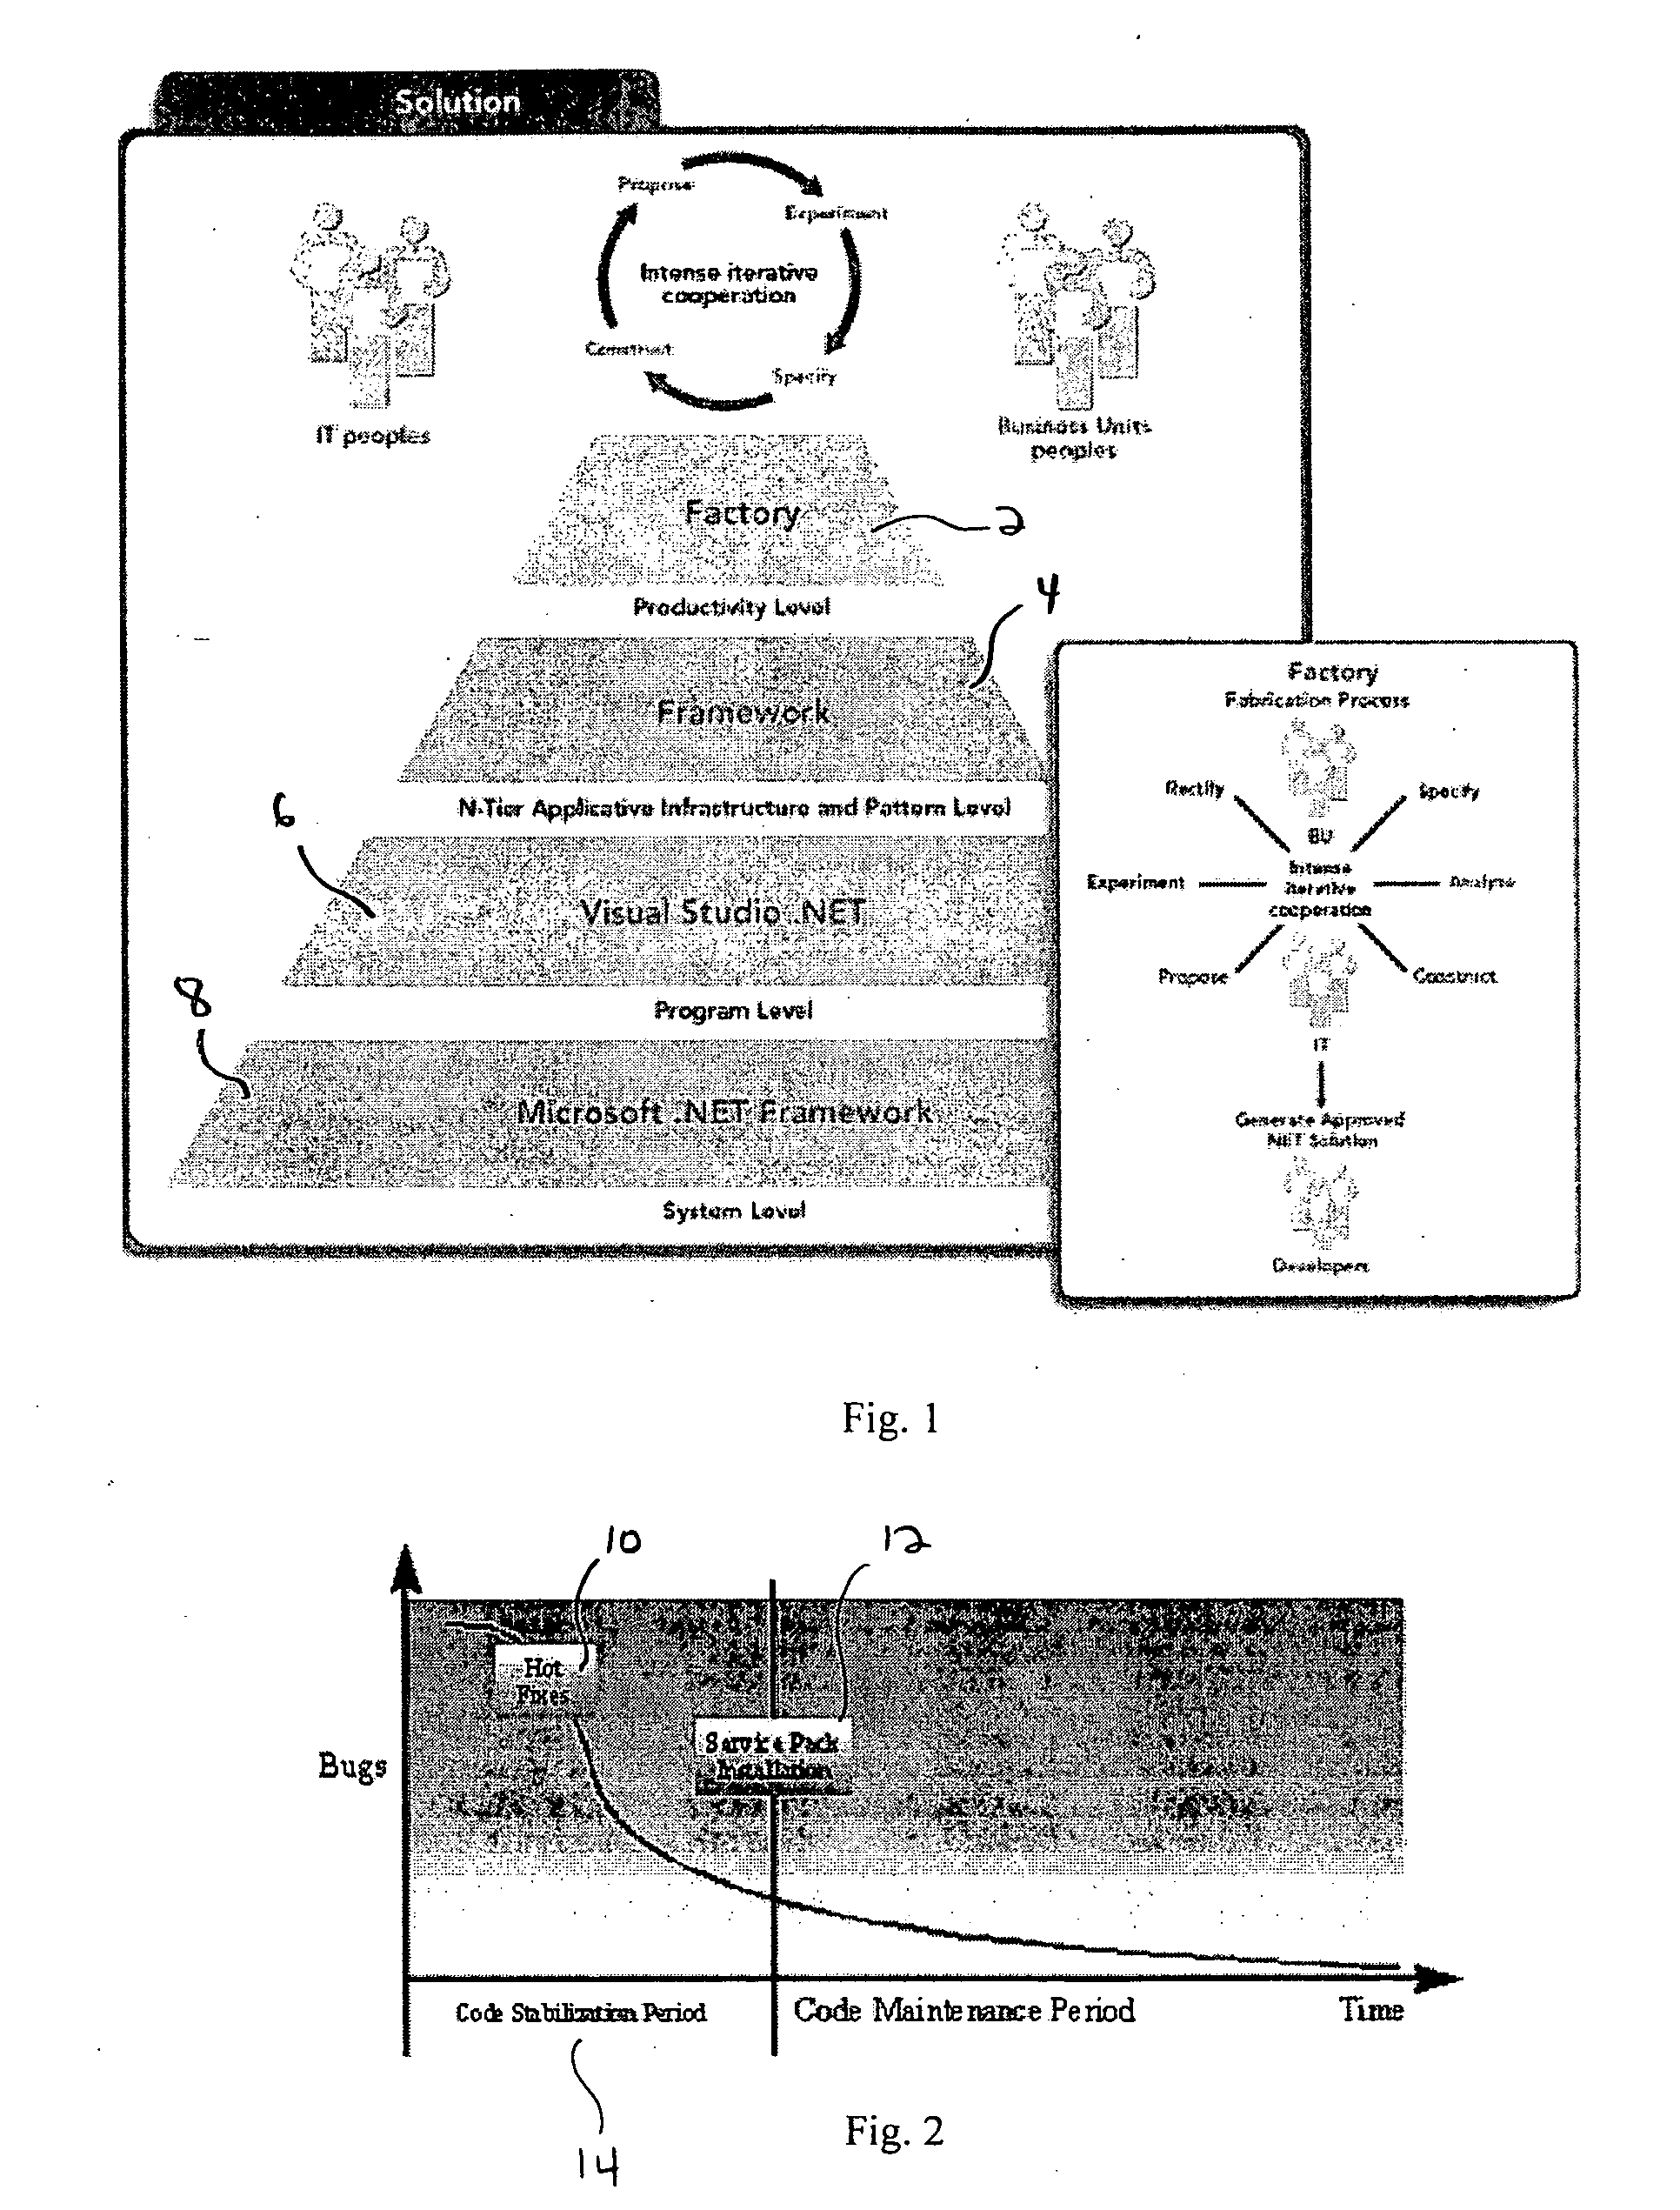 Distributed software fabrication system and process for fabricating business applications